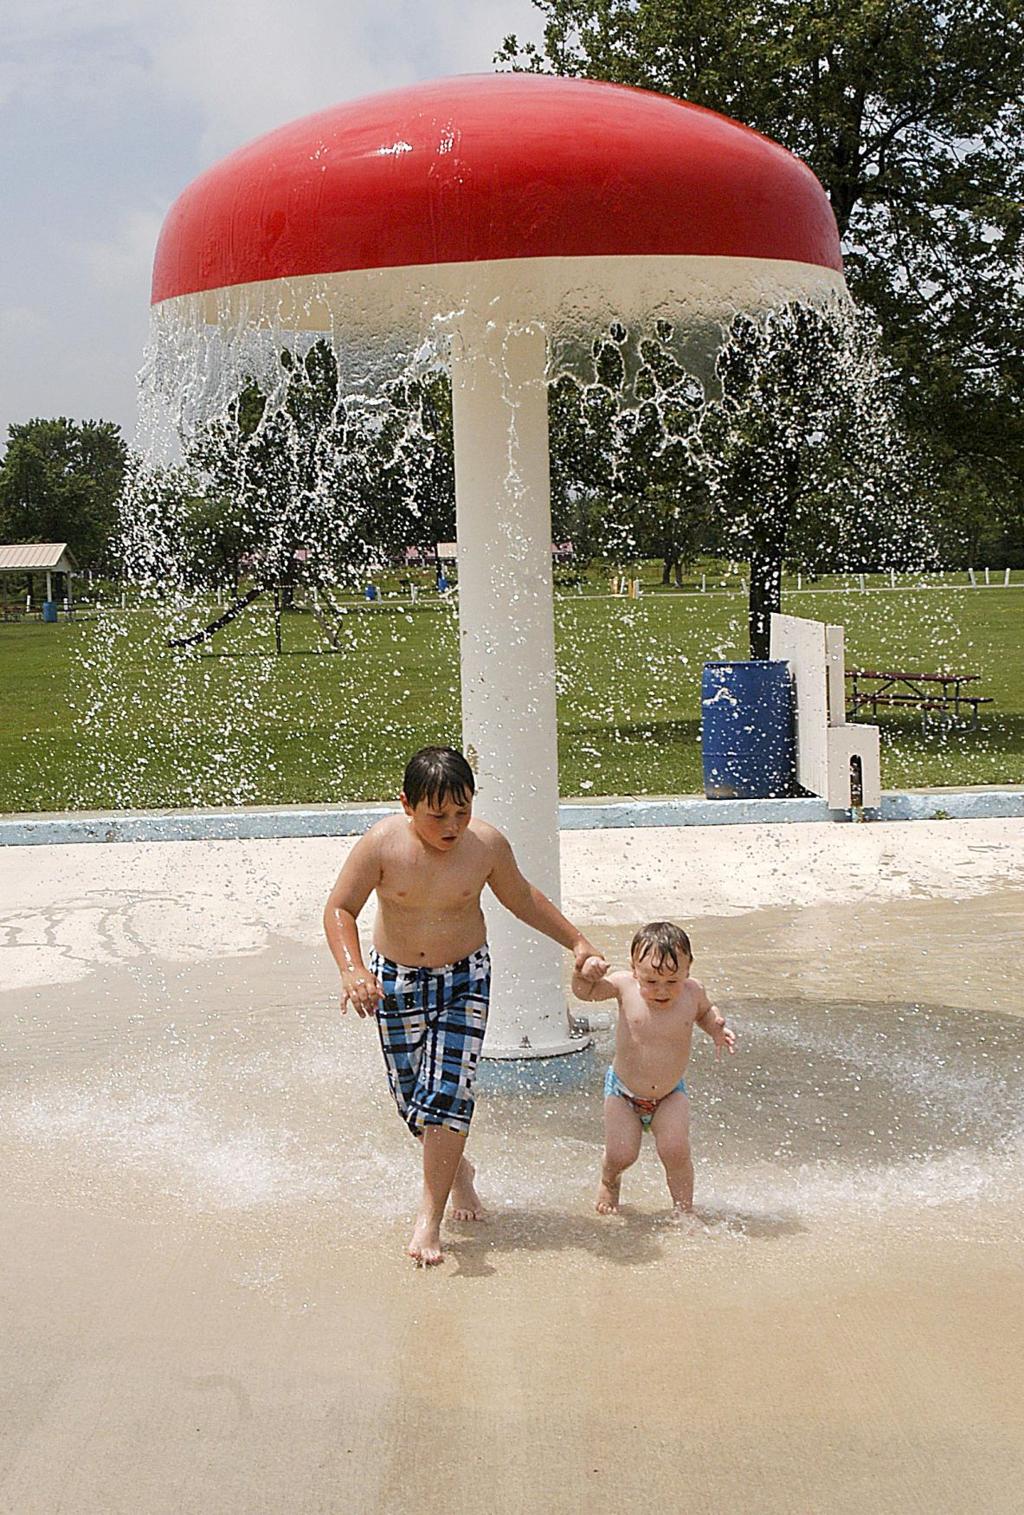 Thorold Community Pool and splash pads opening early for season